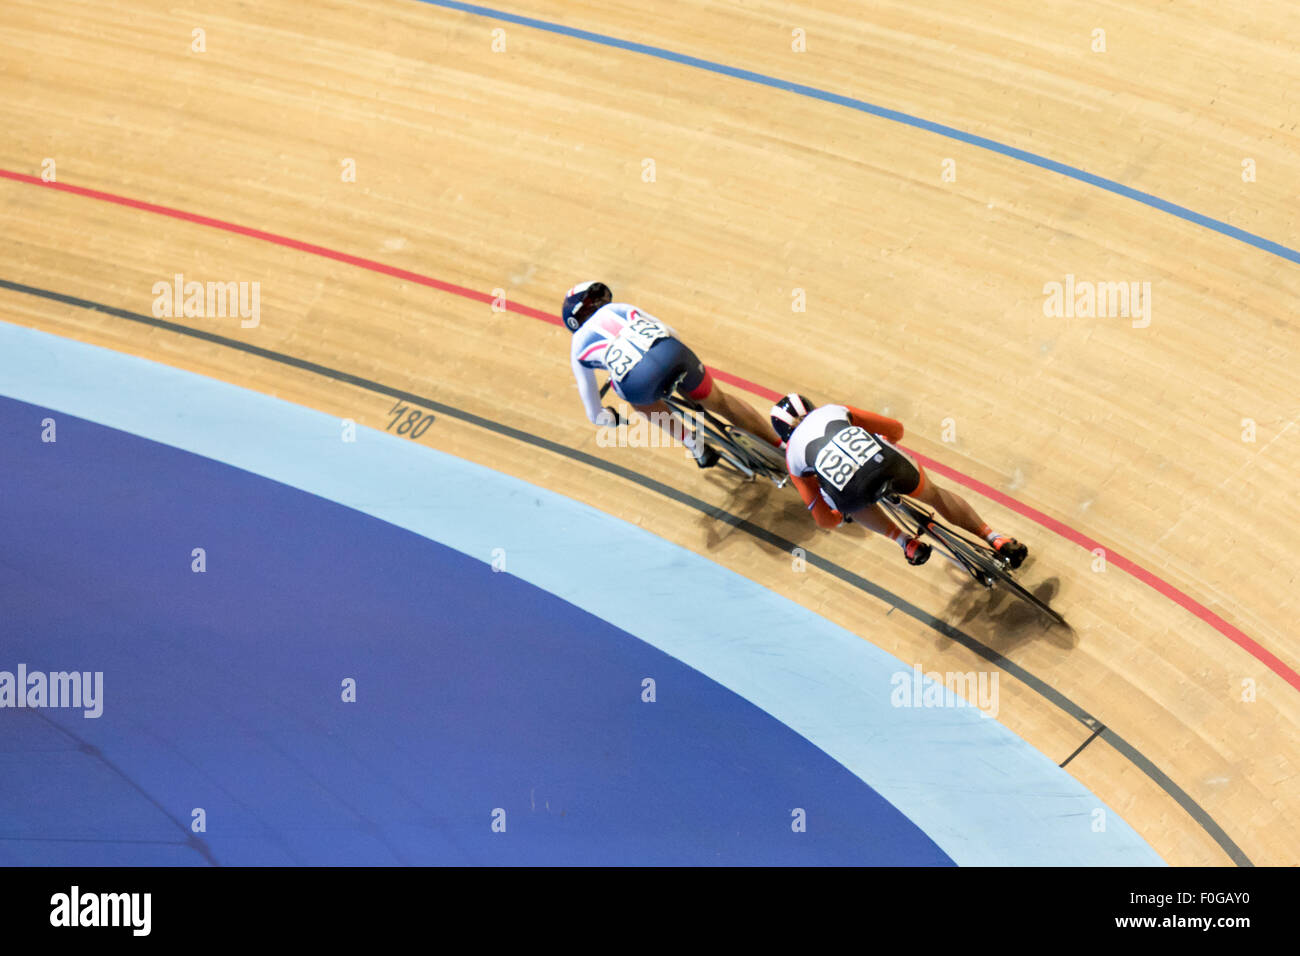 Derby, UK. 15th Aug, 2015. Dannielle Khan of Great Britain leads Yesna Rijkhoff of The Netherlands in the women's sprint competition at the Revolution Series at Derby Arena, Derby, United Kingdom on 15 August 2015. The Revolution Series is a professional track racing series featuring many of the world's best track cyclists. This event, taking place over 3 days from 14-16 August 2015, is an important preparation event for the Rio 2016 Olympic Games, allowing British riders to score qualifying points for the Games. Credit:  Andrew Peat/Alamy Live News Stock Photo